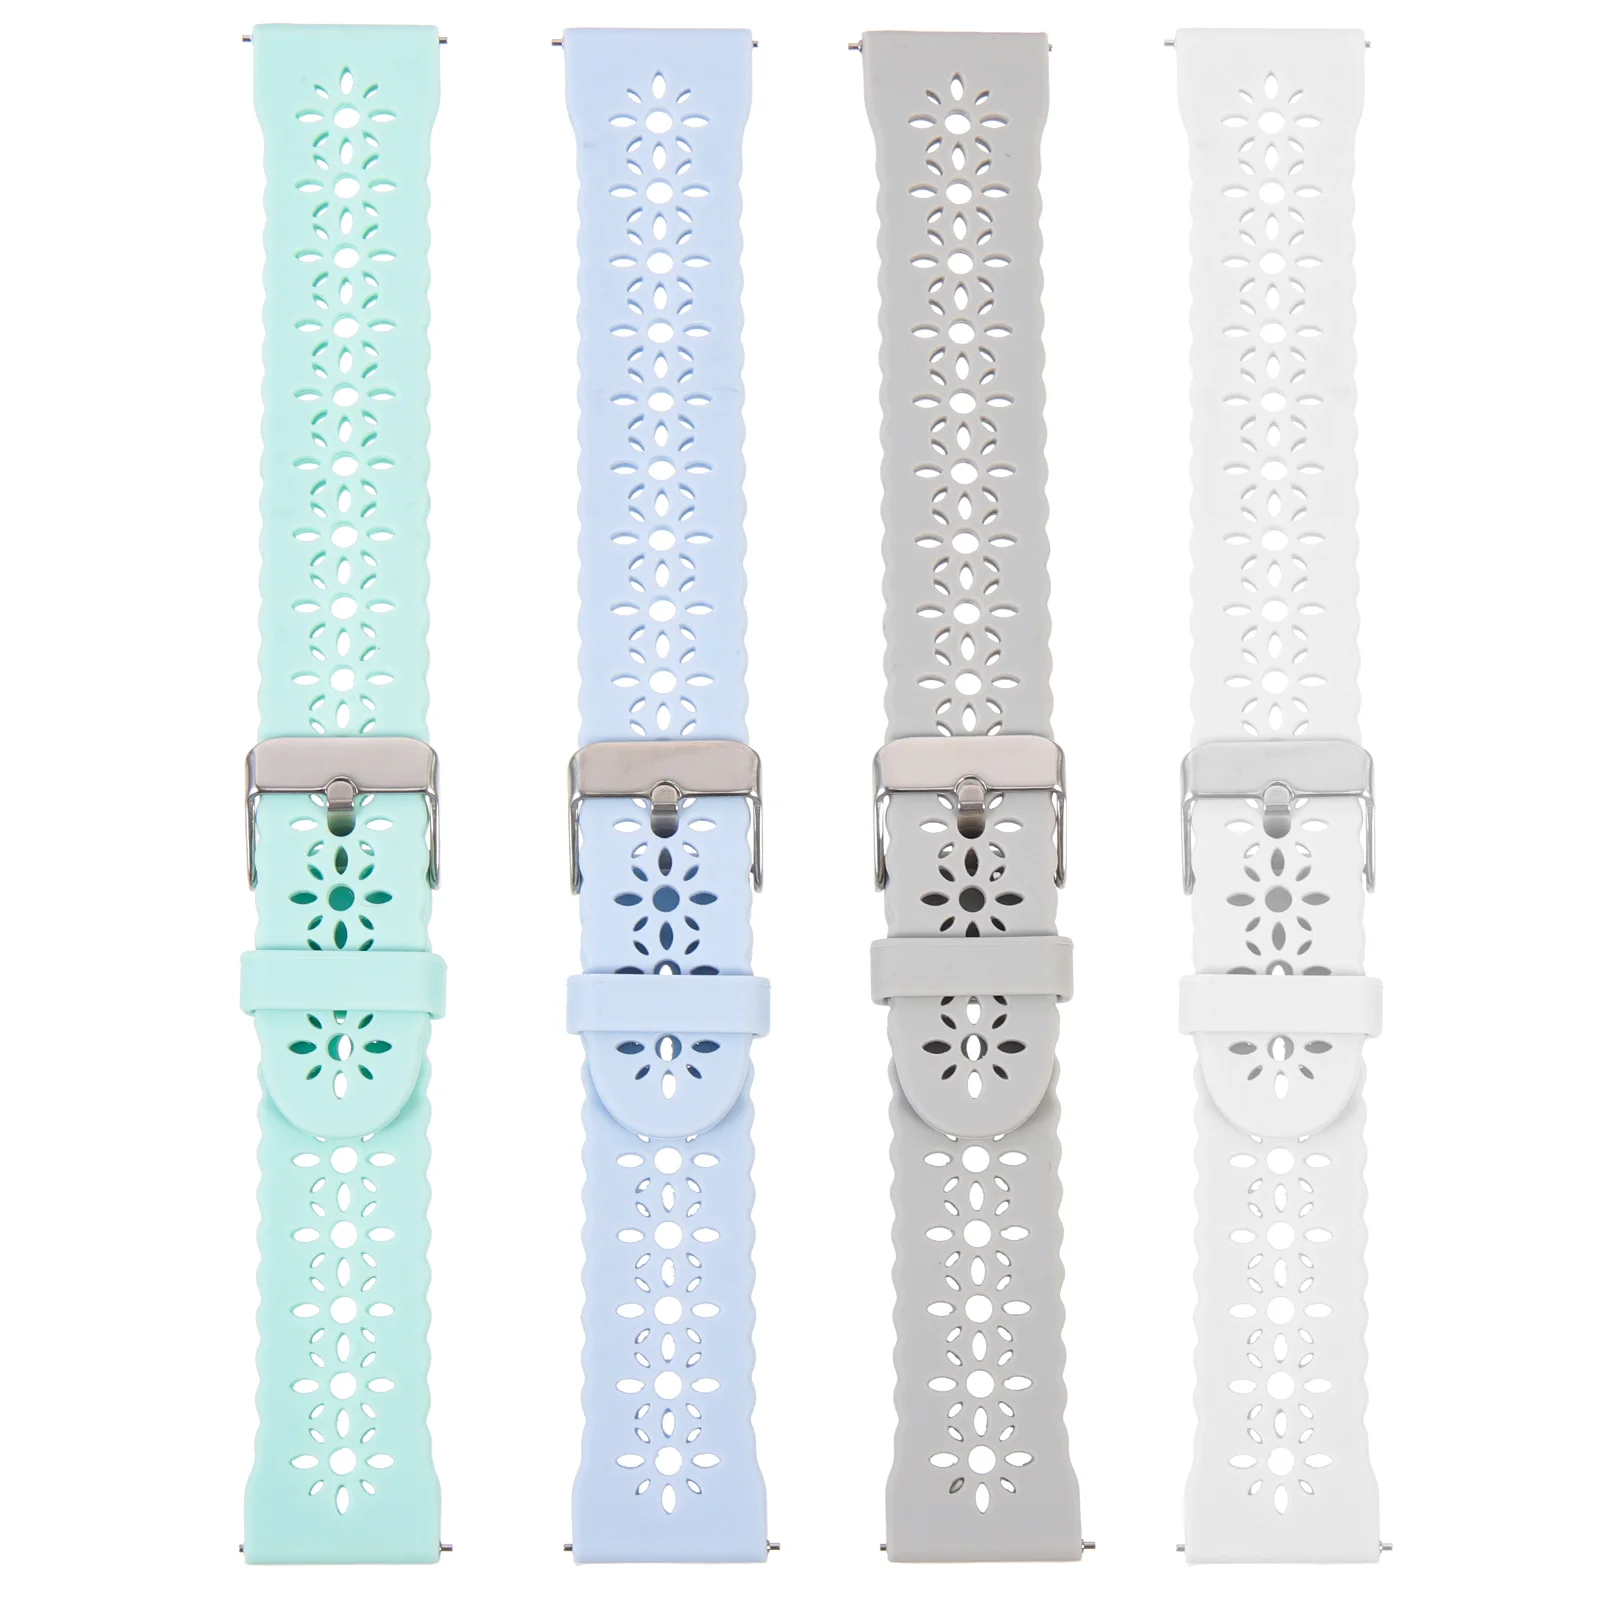 

4 Pcs Lace Silicone Strap Watch Smartwatch Band Replacement Fashion Watchbands Men's Watches Silica Gel Breathable Wrist